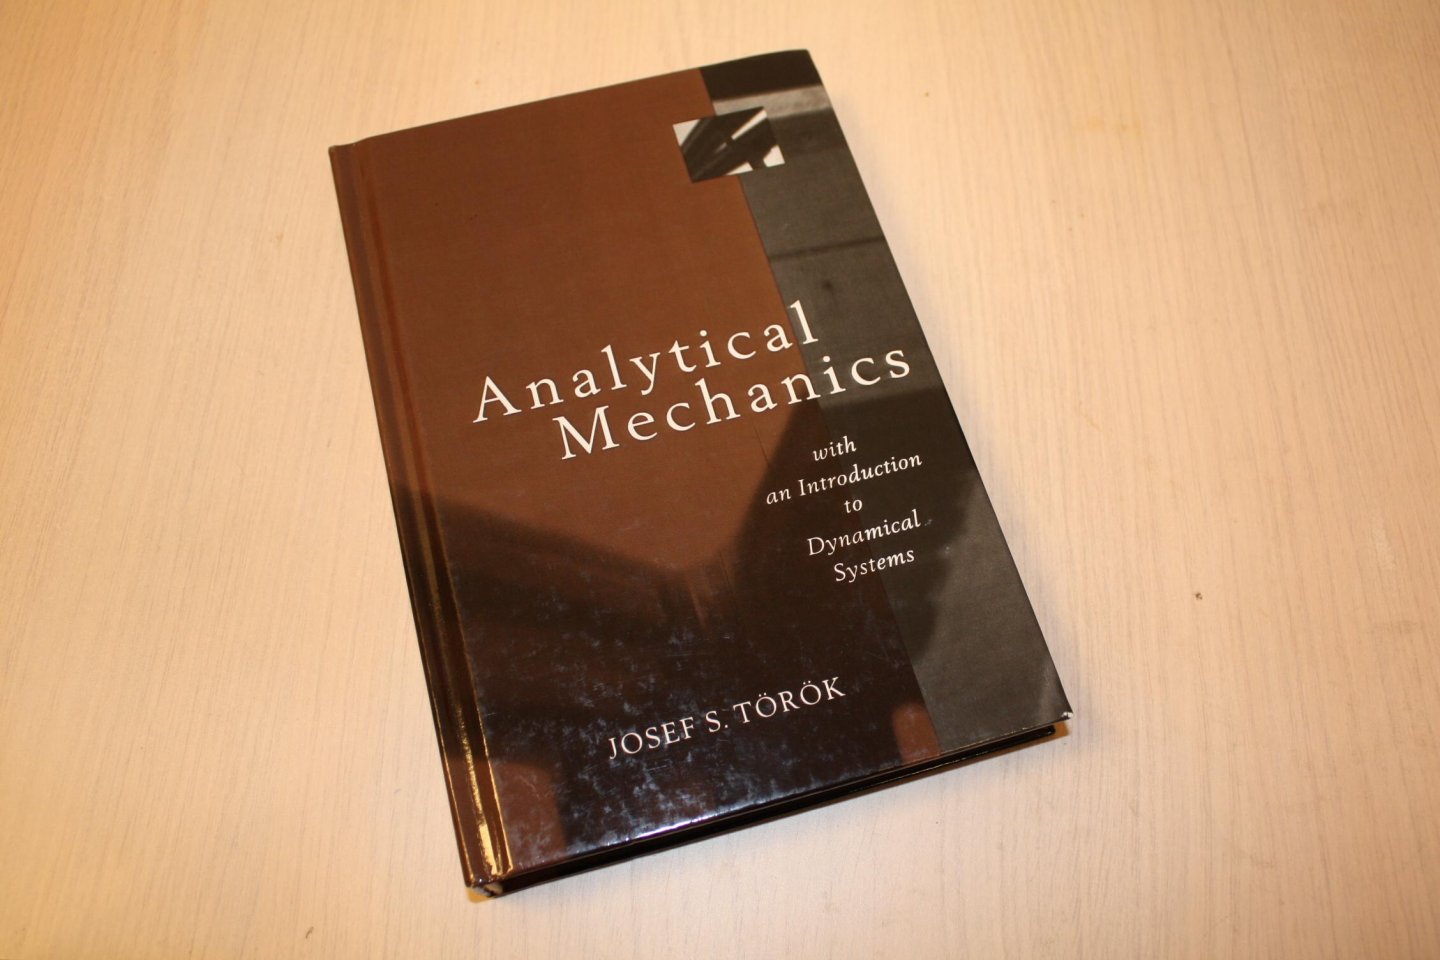 Josef S. Torok - Analytical Mechanics / With an Introduction to Dynamical Systems